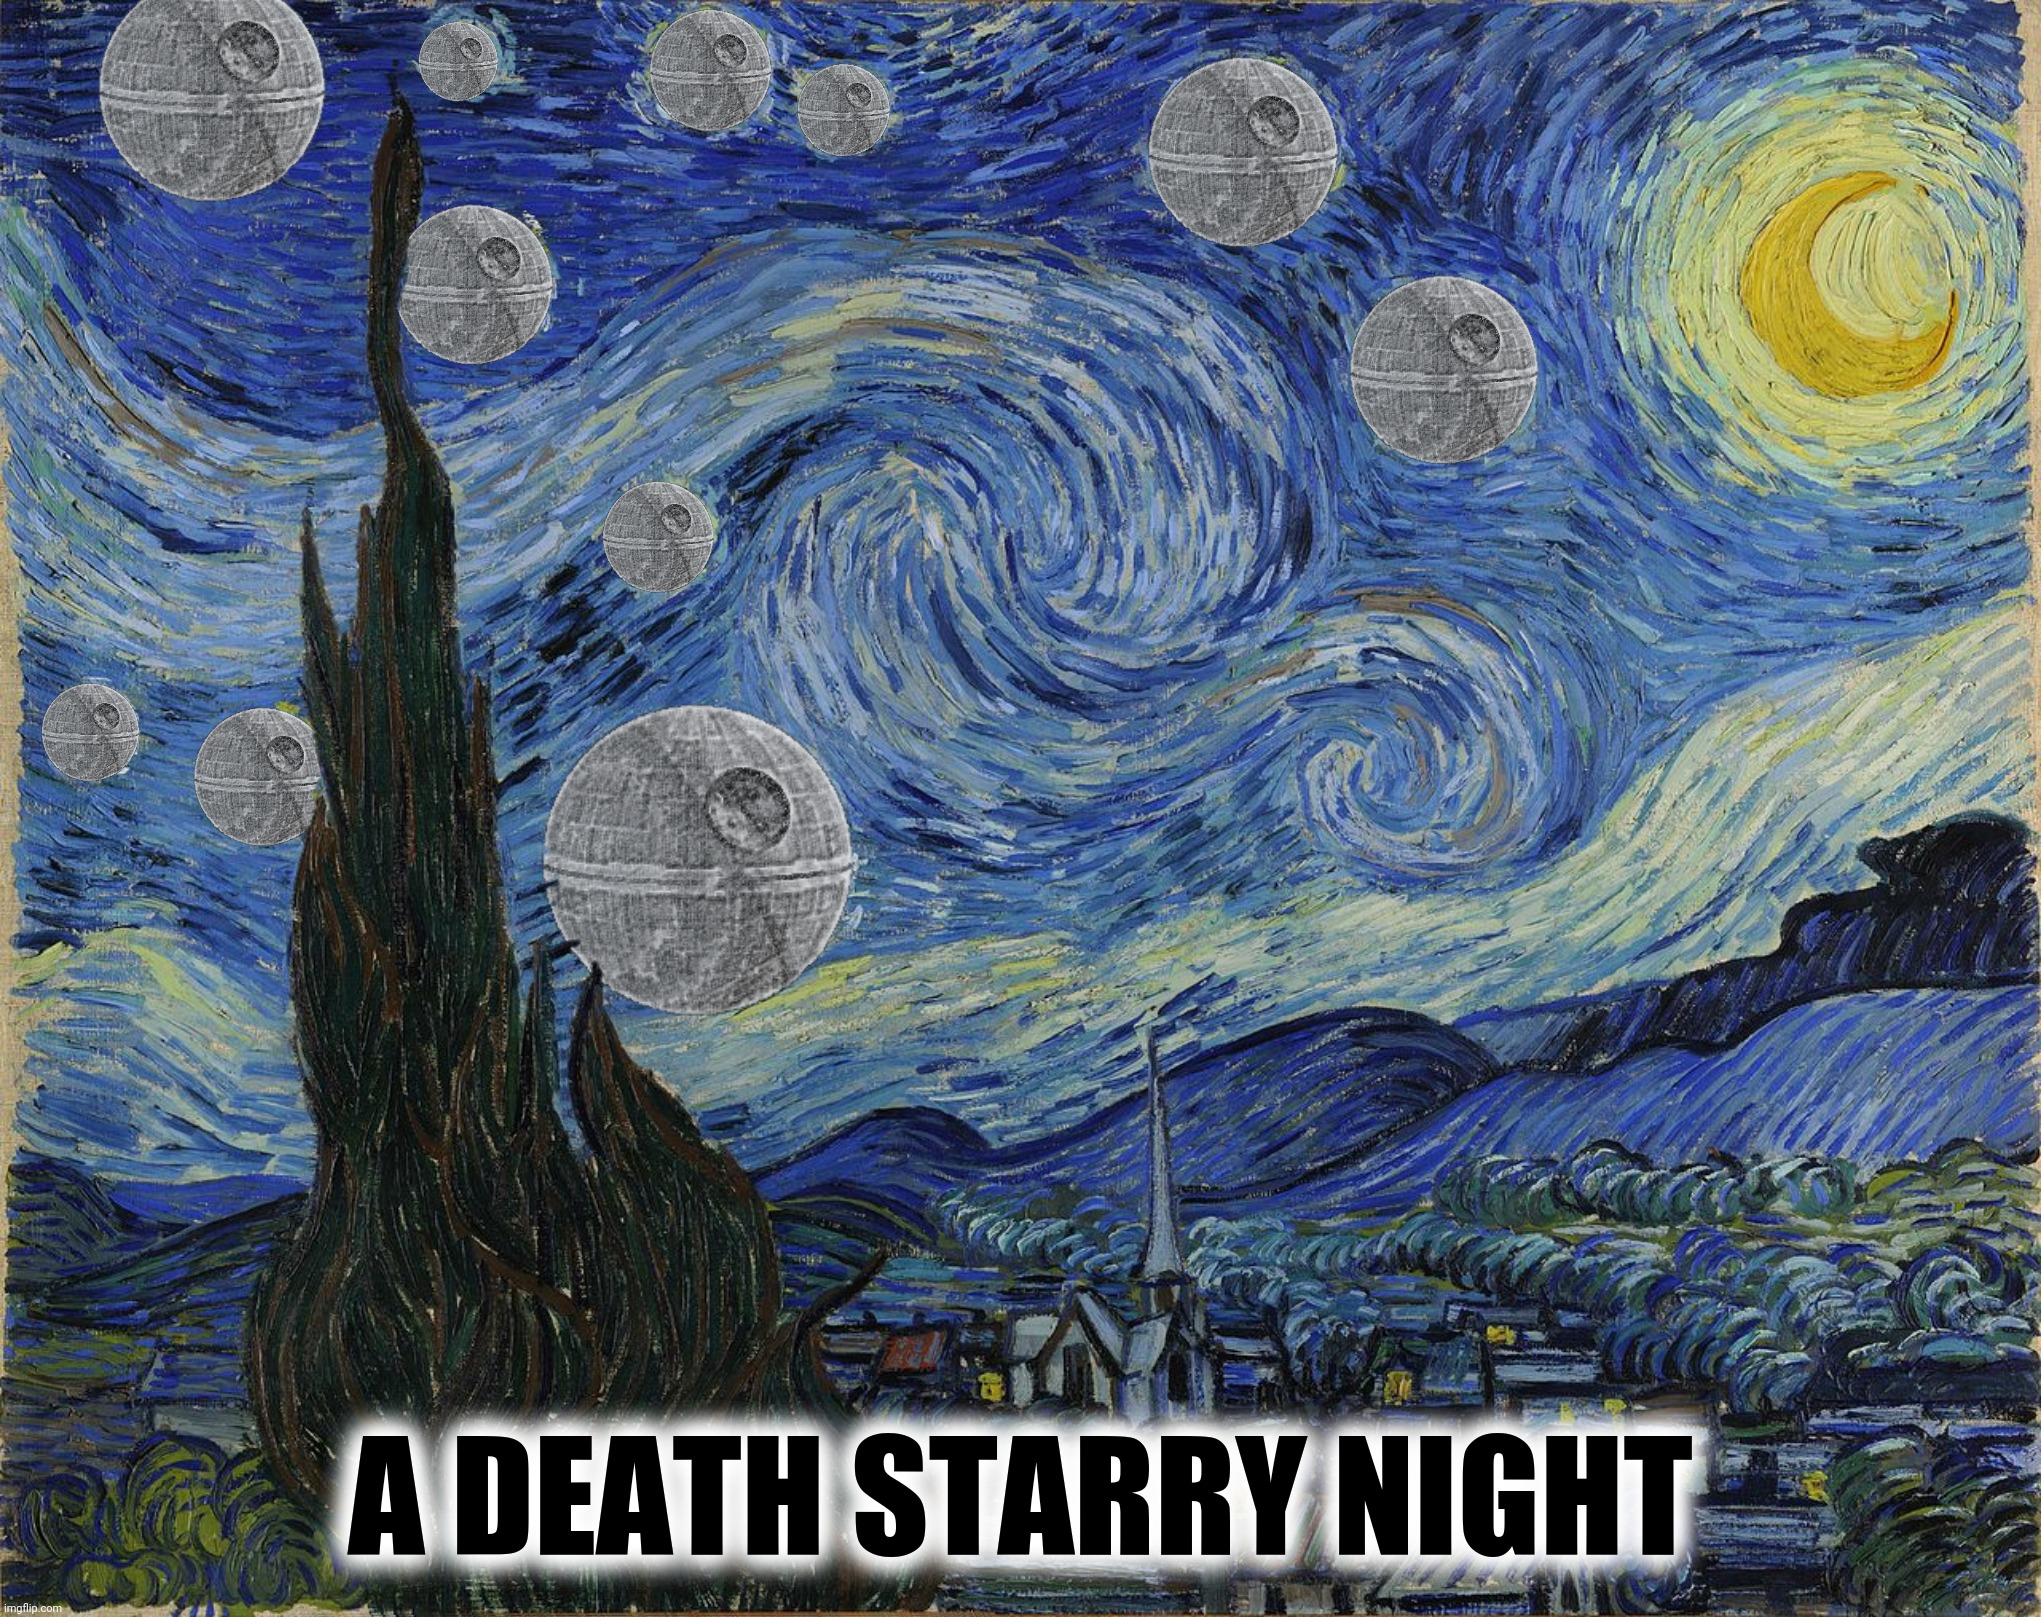 A DEATH STARRY NIGHT | made w/ Imgflip meme maker